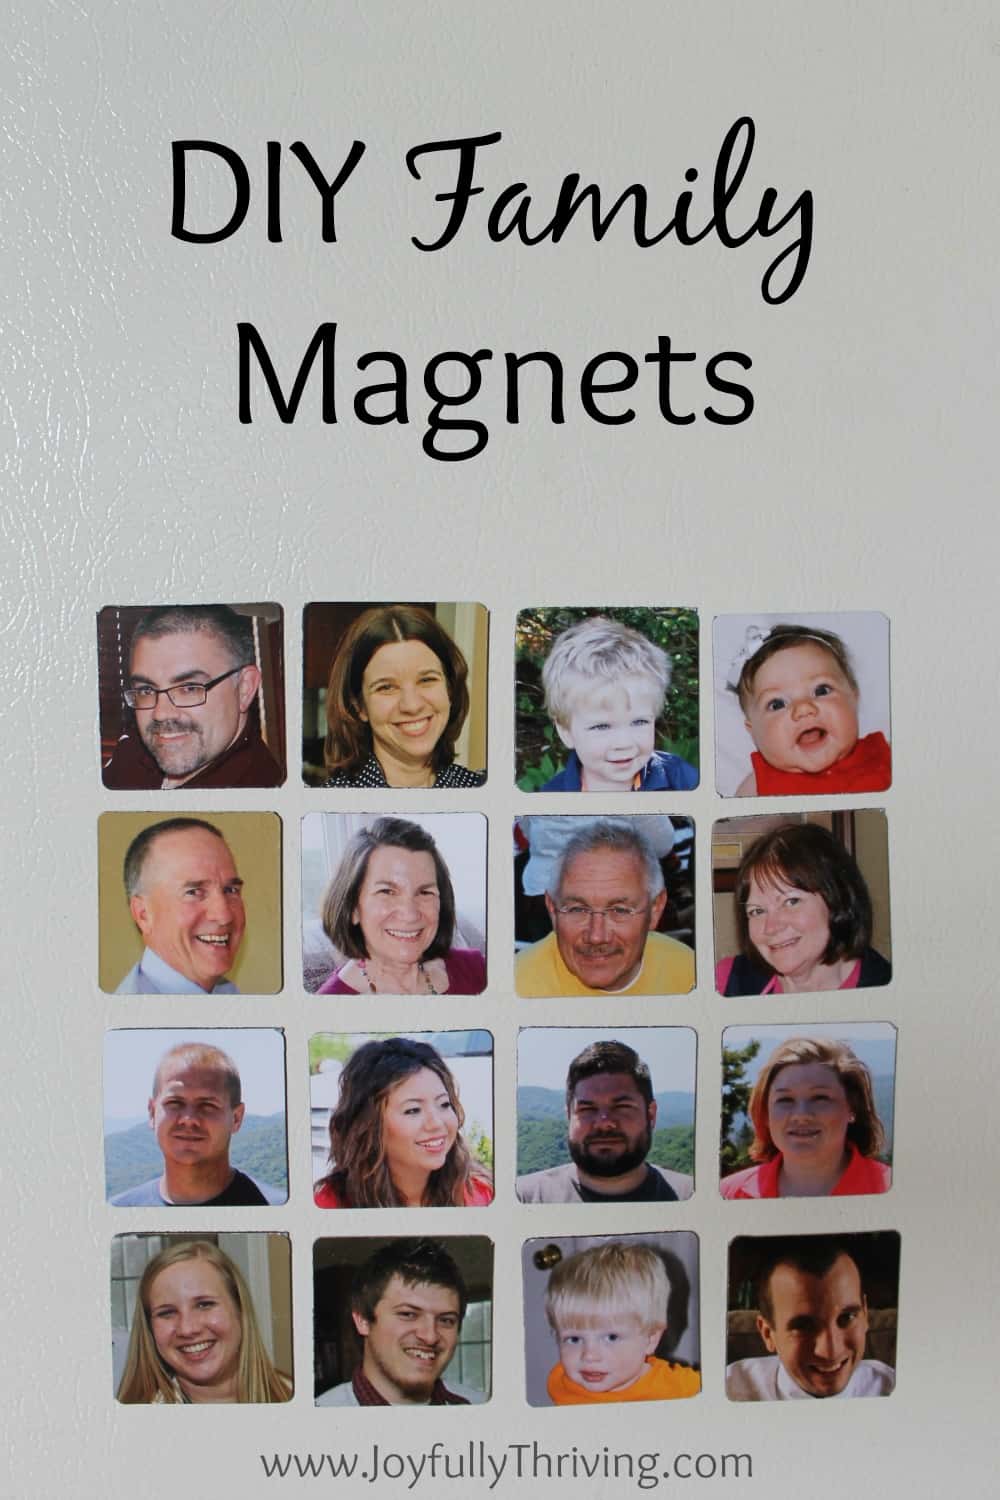 I absolutely LOVE this idea of making family magnets! What a great idea for preschoolers to help them learn family names, especially if they live far away! 